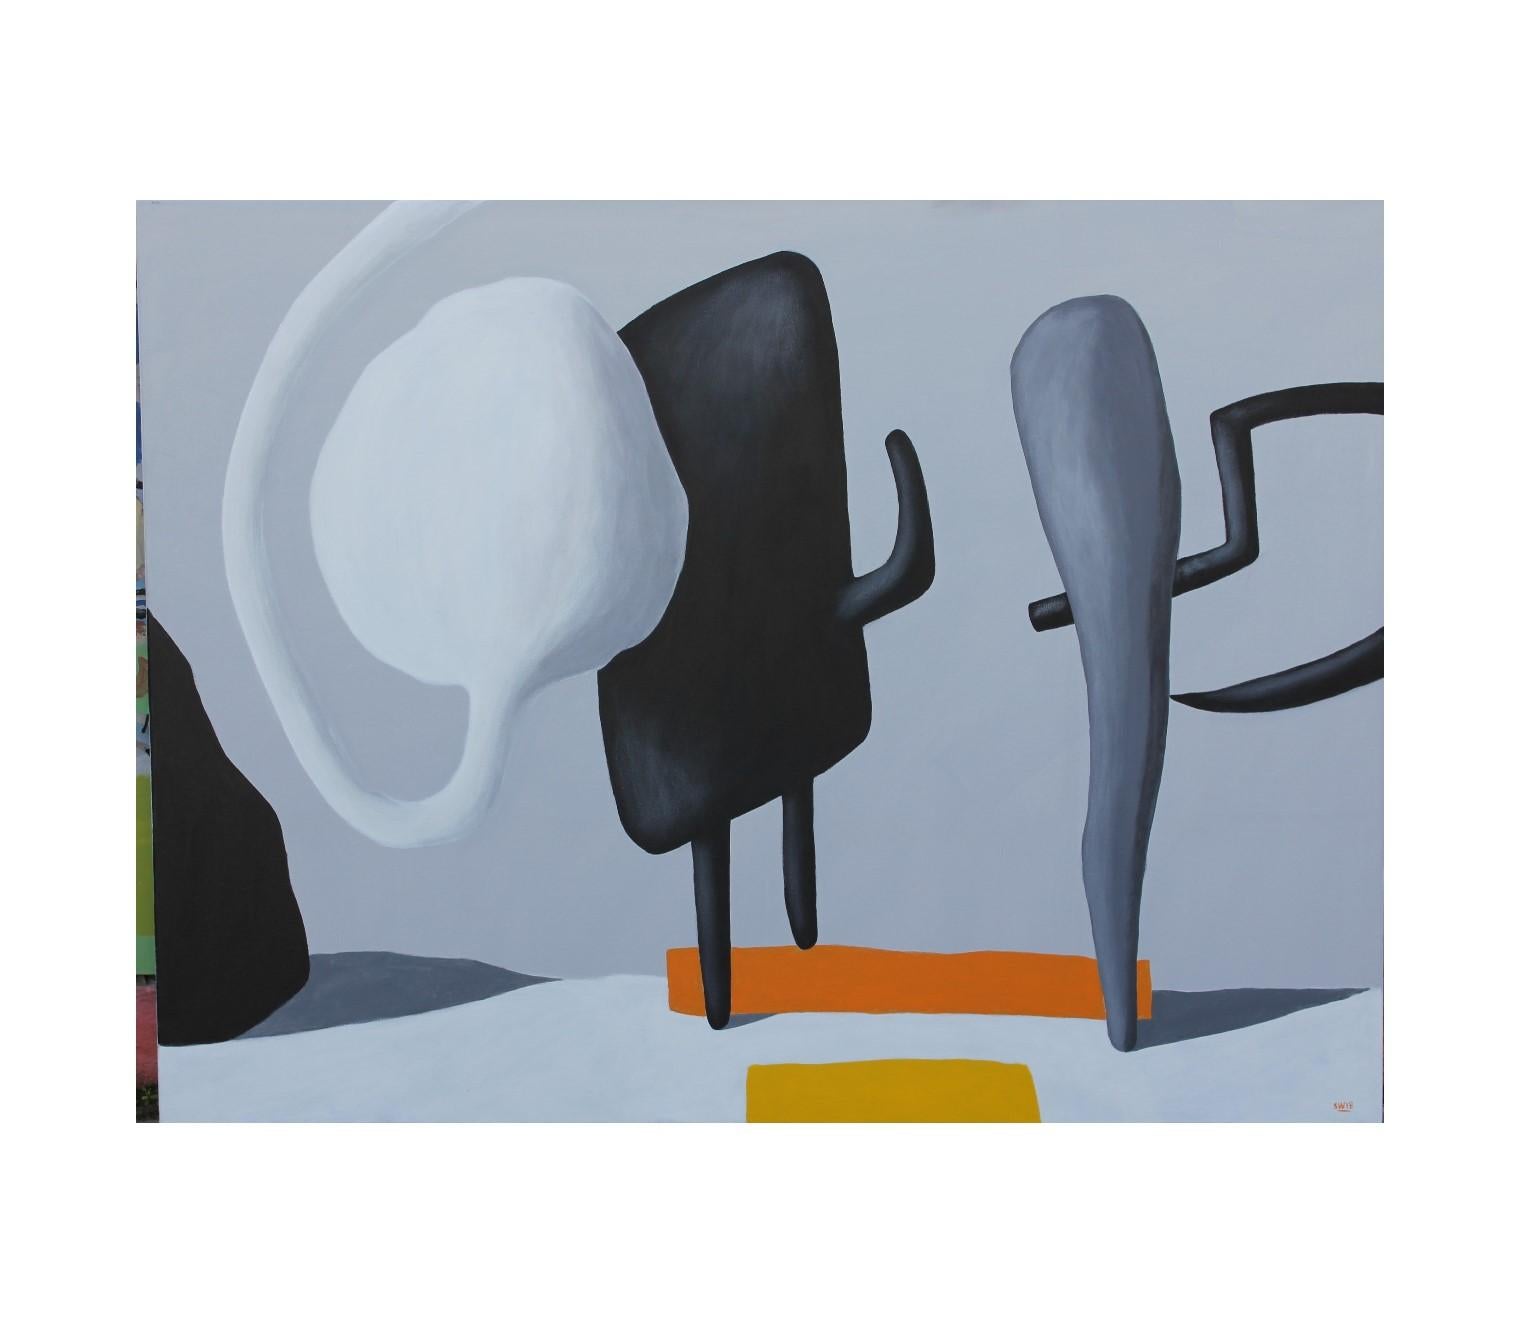 Scott Woodard Abstract Painting - "Spermy and Licorice Popsicle Meet the Club" Bubble Surrealist Painting